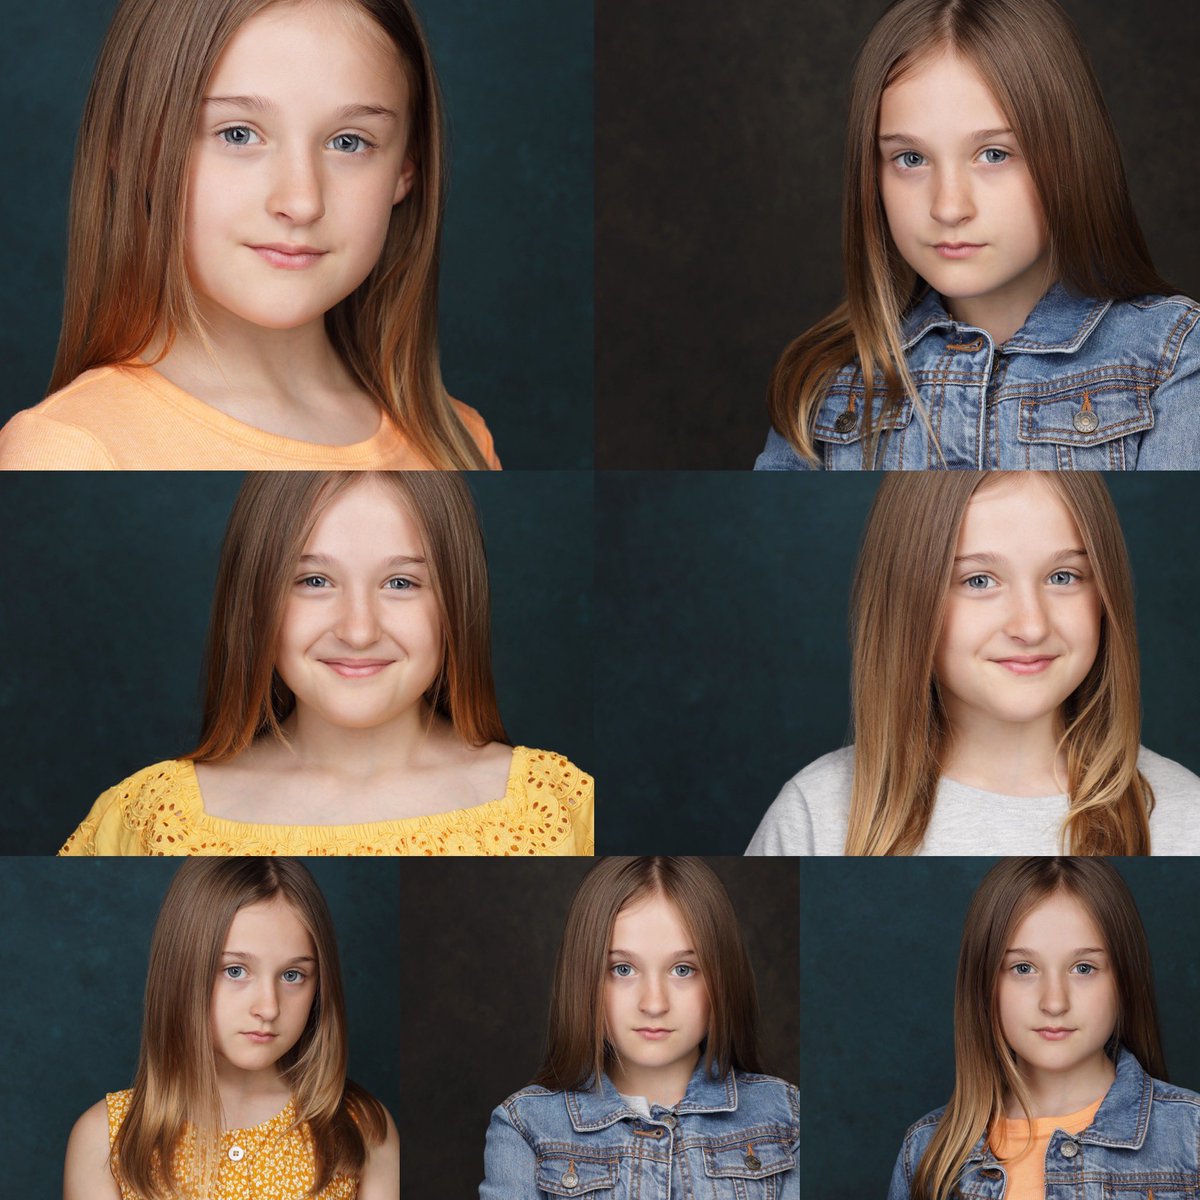 Yay! 🎬📸👩🏼❤️Really pleased with my new headshots from Michael Batten!
.
Would love to see which ones you like! Thanks so much! ❤️
.
#childactor #childactors #britishactor #britishactress #castingkids #kidscasting #casting #childactress #headshot